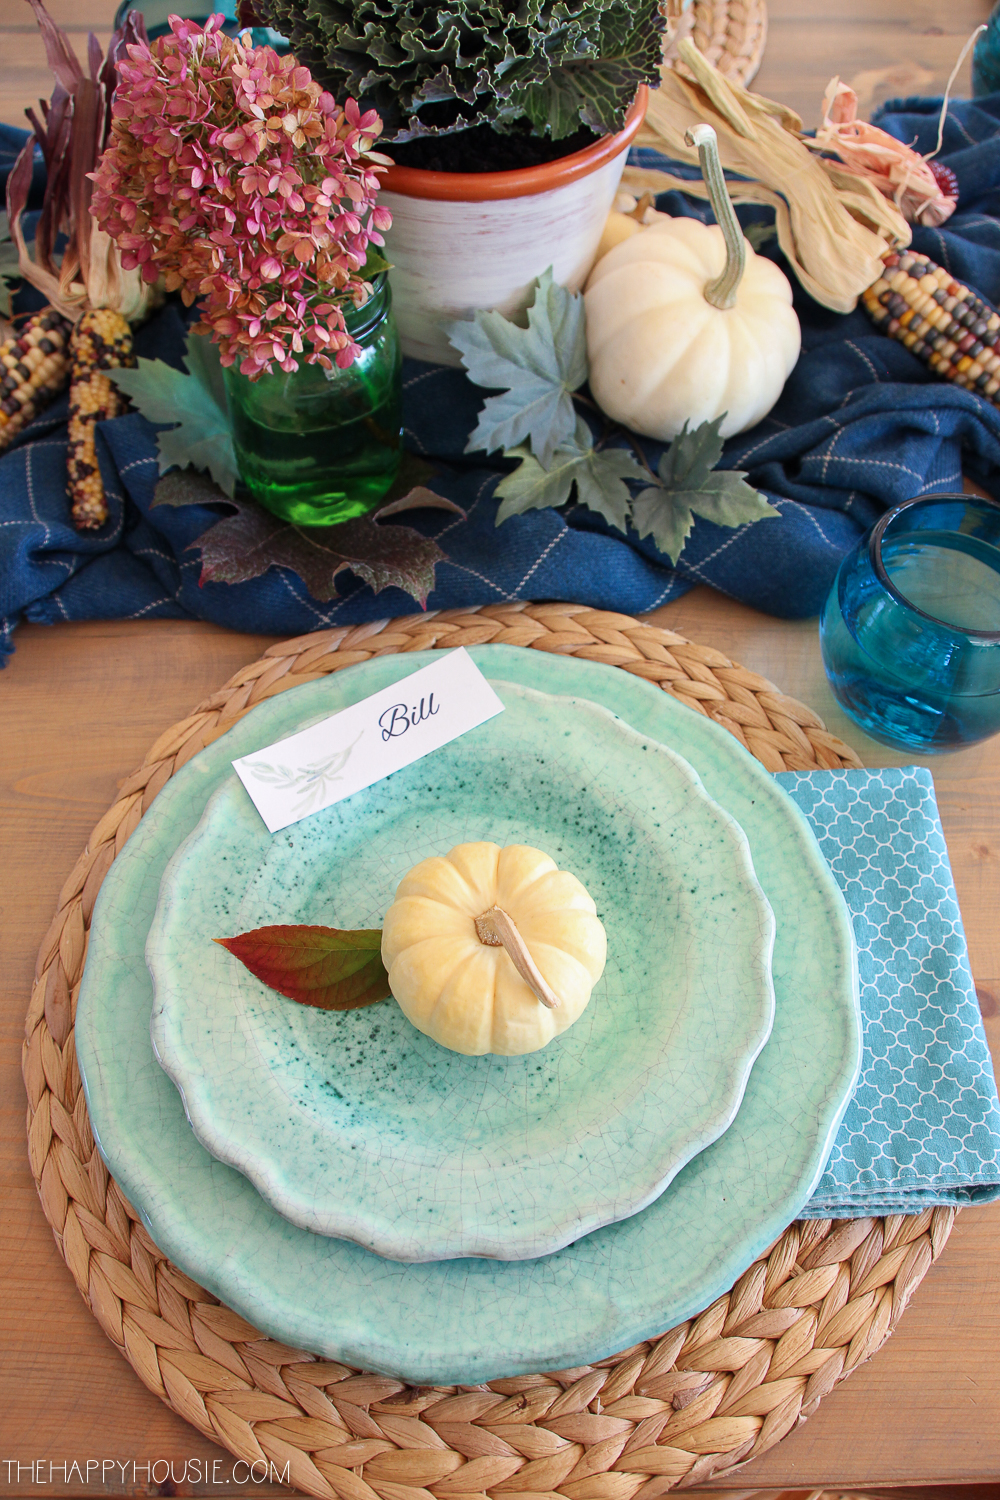 A single white mini pumpkin is in the middle of the blue plate.